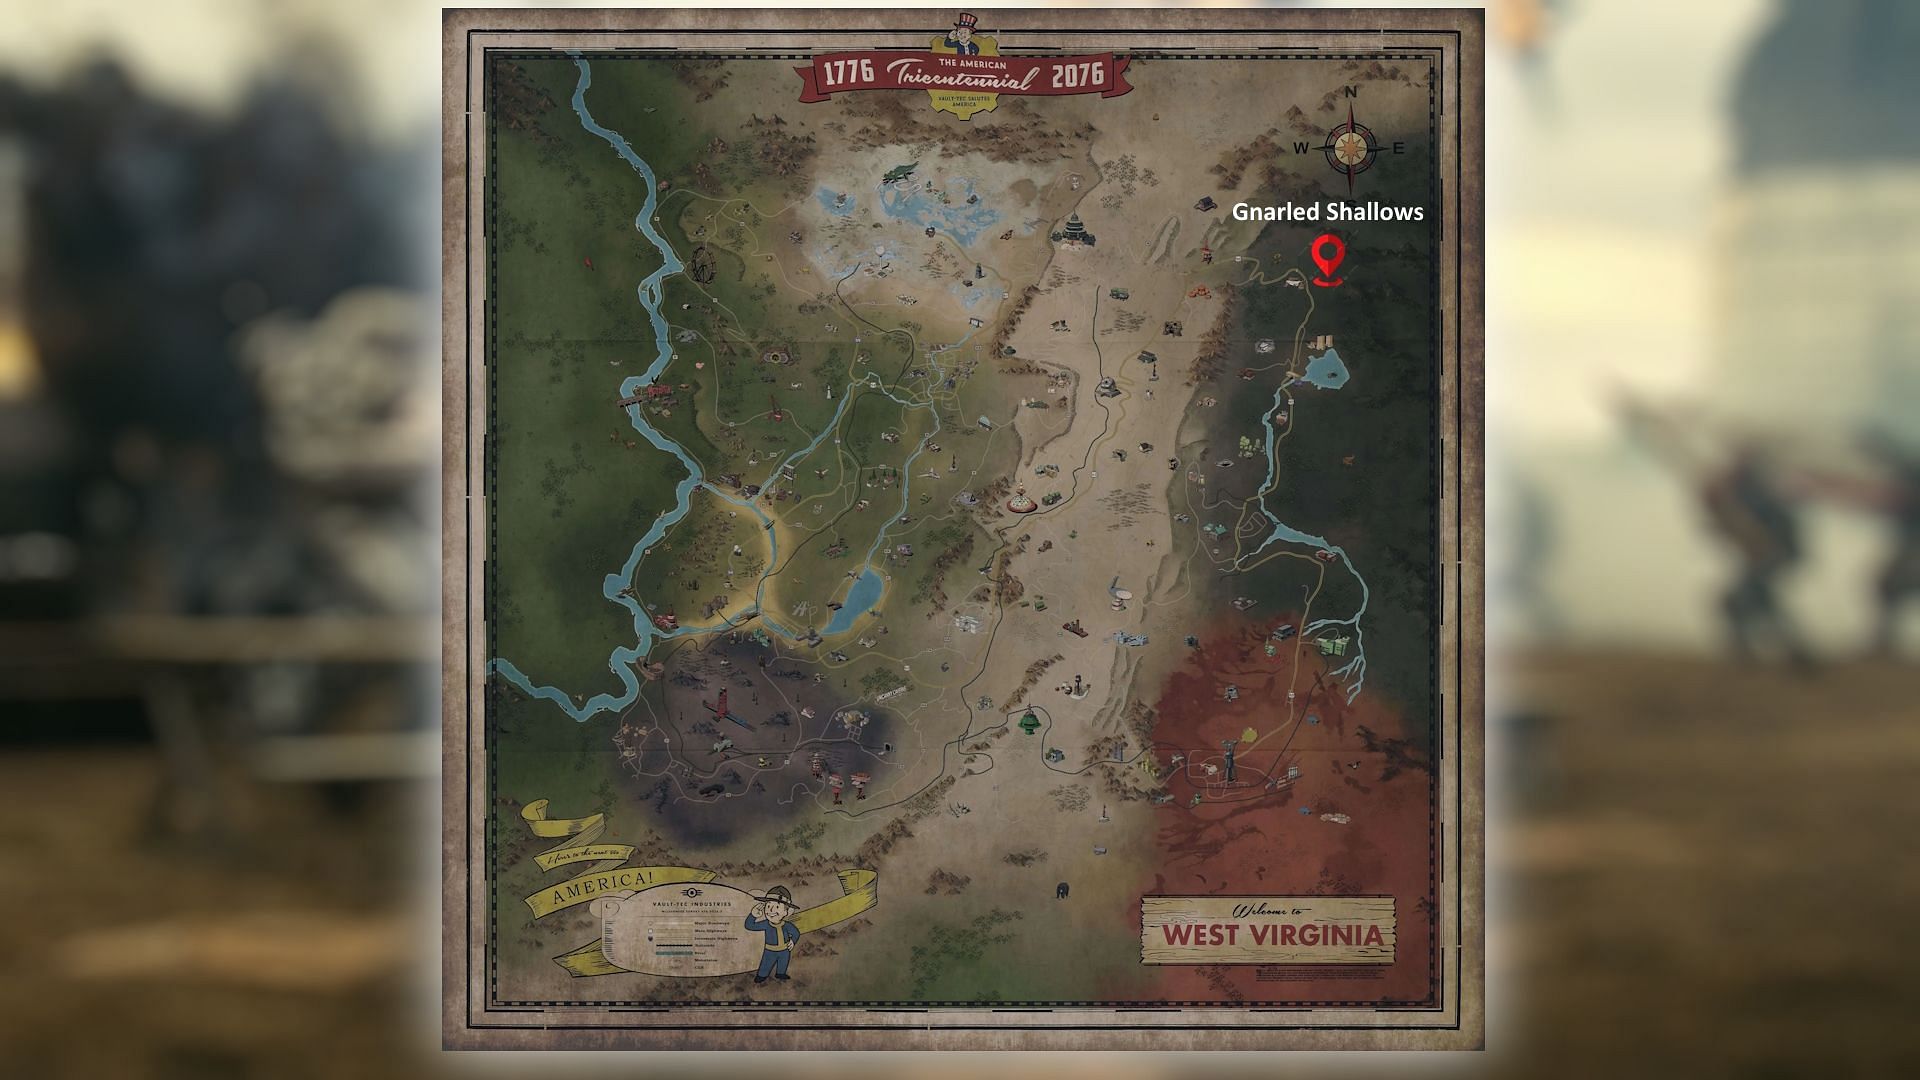 The Gnarled Shallows is located in the Mire region (Image via Bethesda Game Studios)